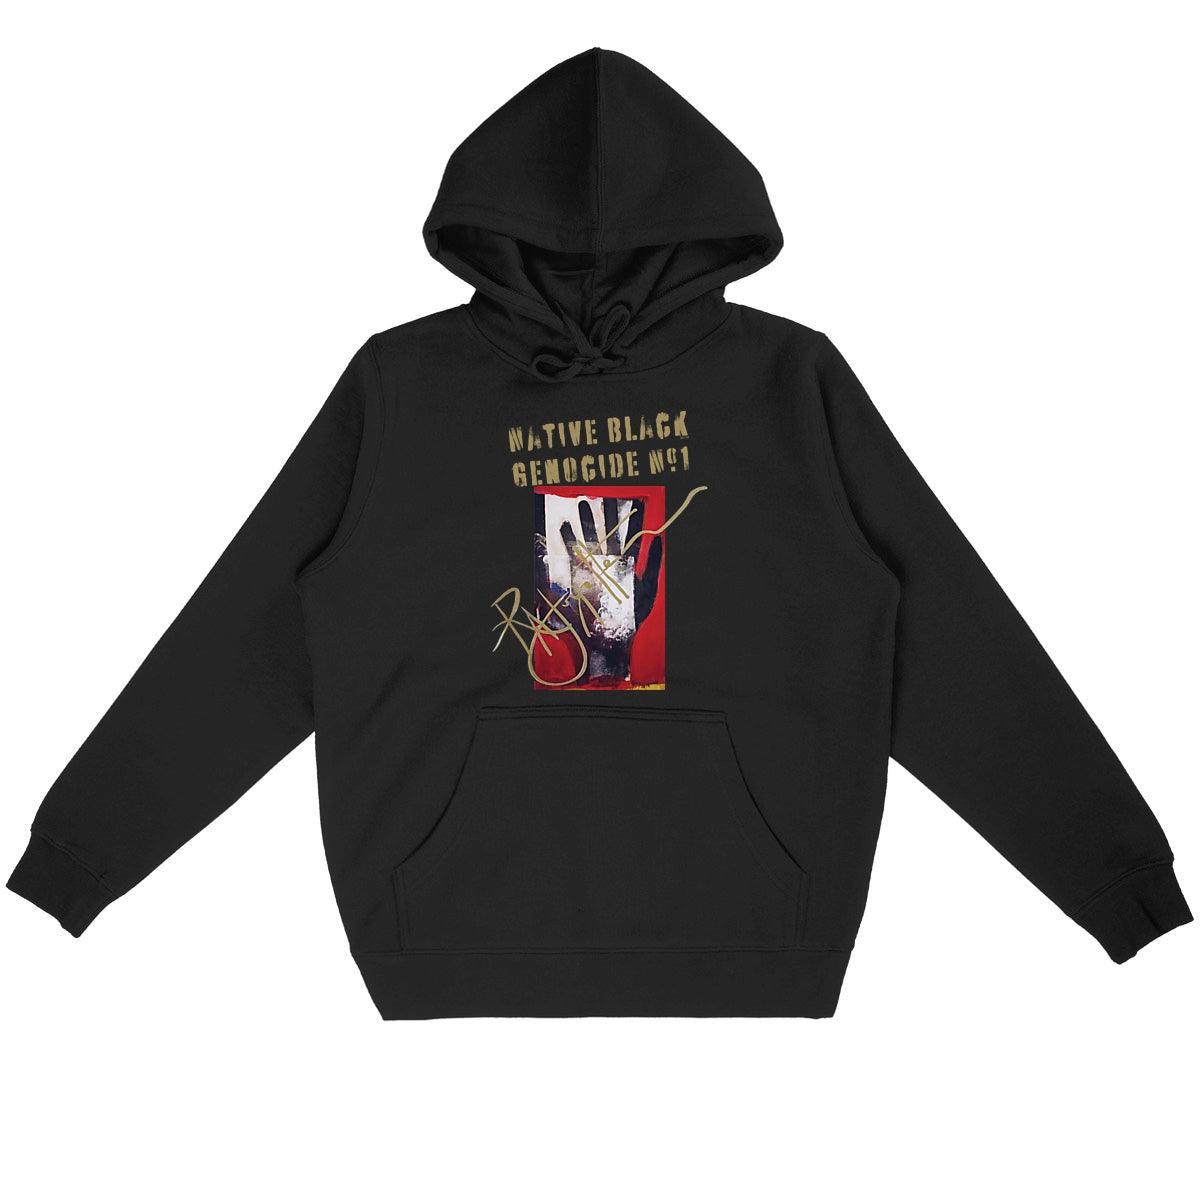 Native Black Genocide Premium Unisex Hoodie, lightweight straight cut, designed by Tree of Life Art, merging style with a strong message.